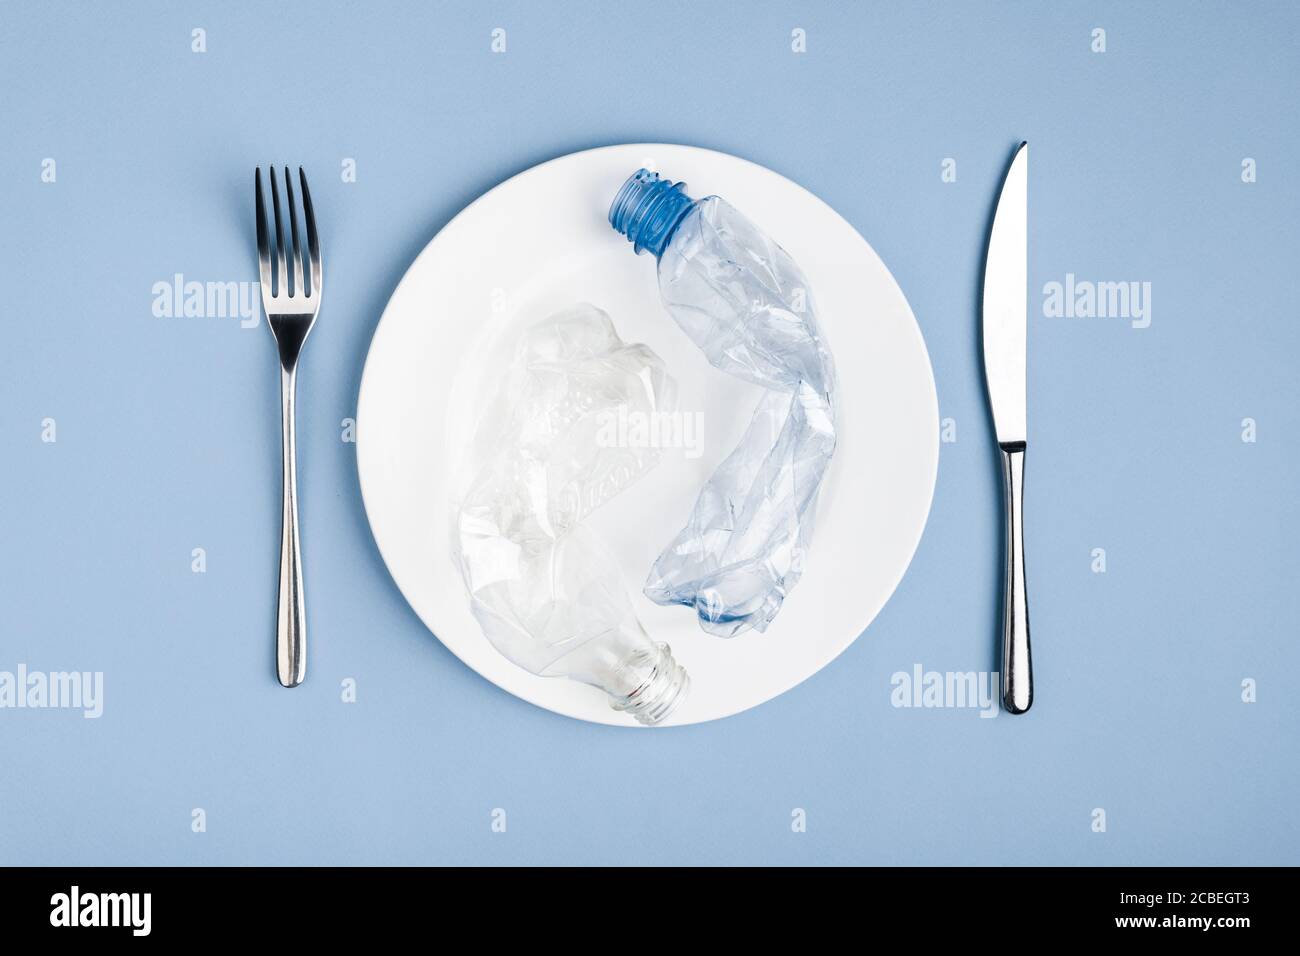 Top view of plastic waste garbage in the white plate, knife and fork Stock Photo